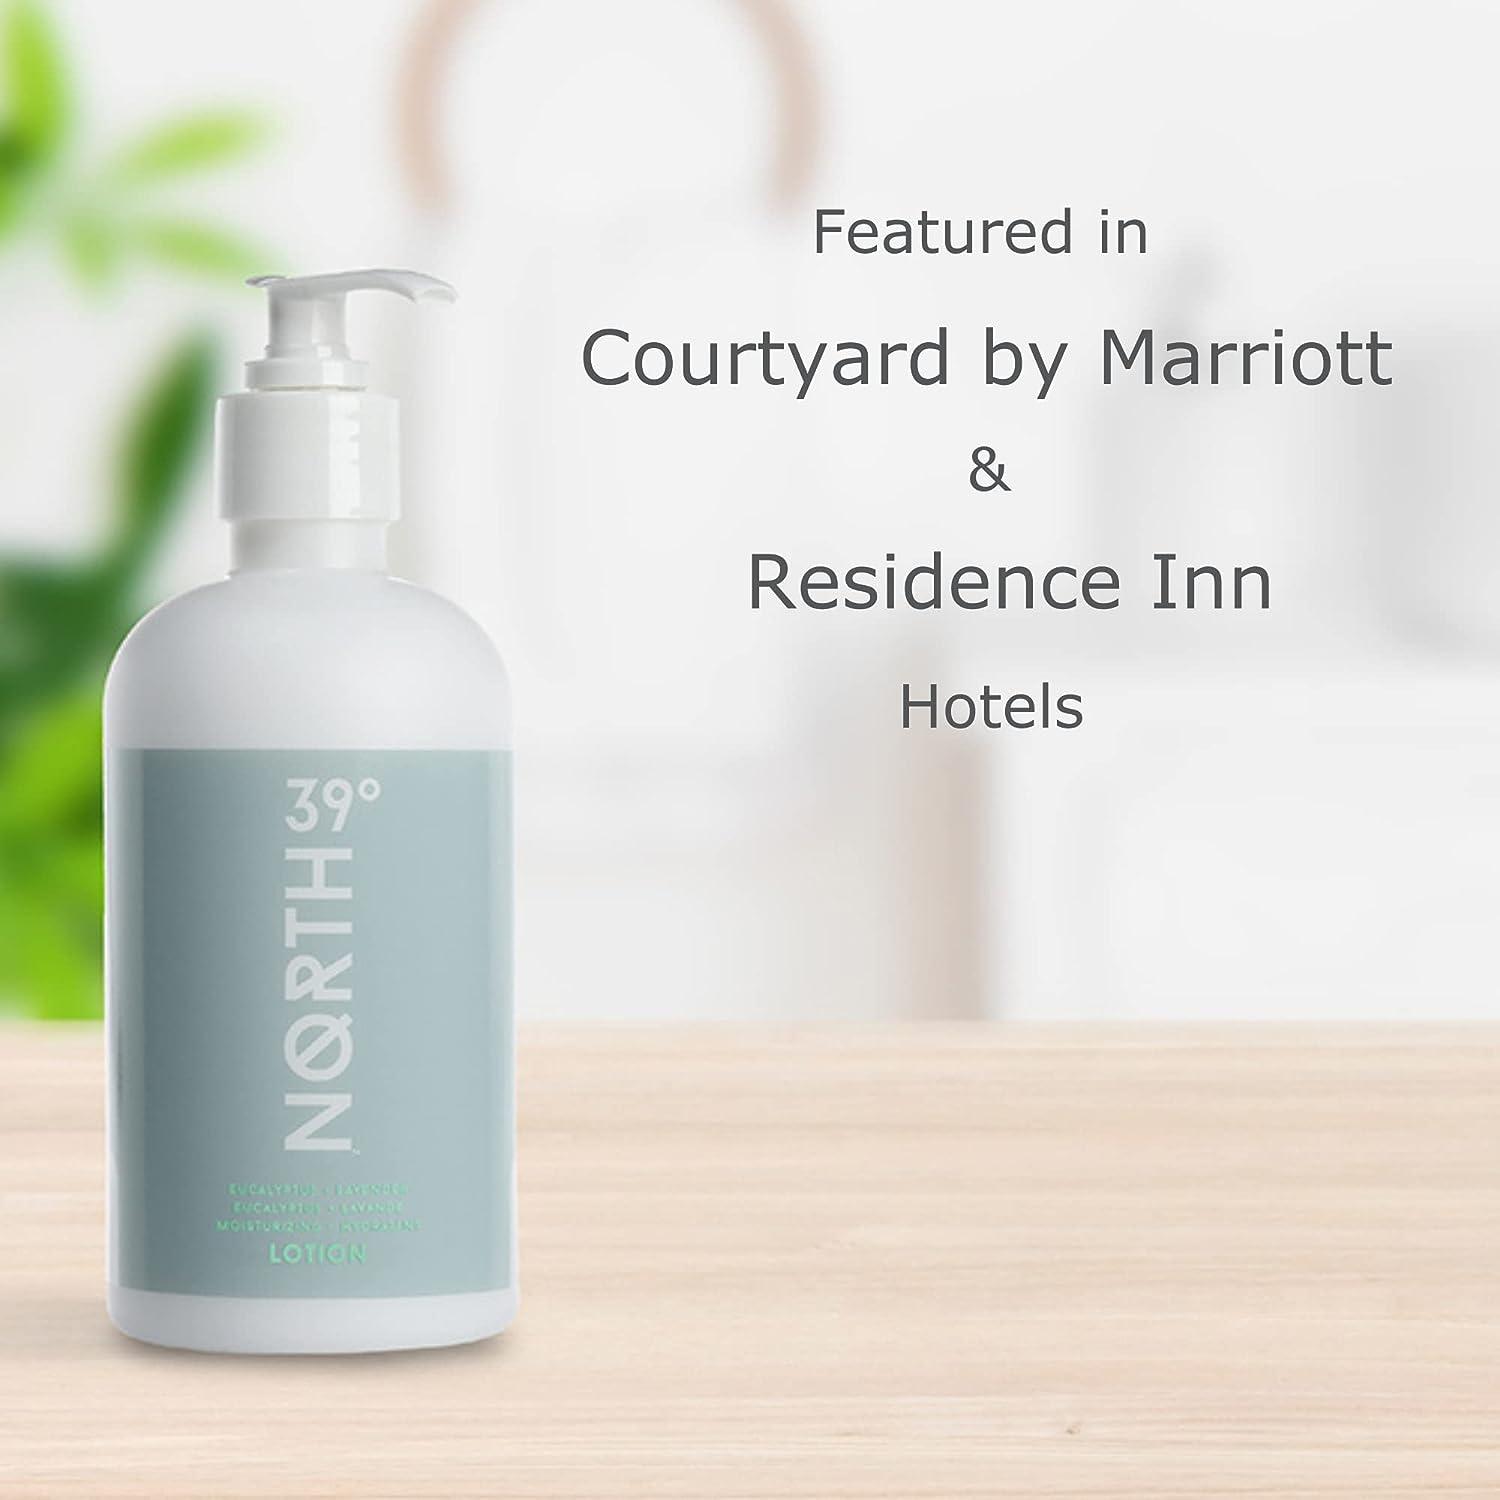 39° North Body Lotion  Bring Home the Courtyard Bath Experience